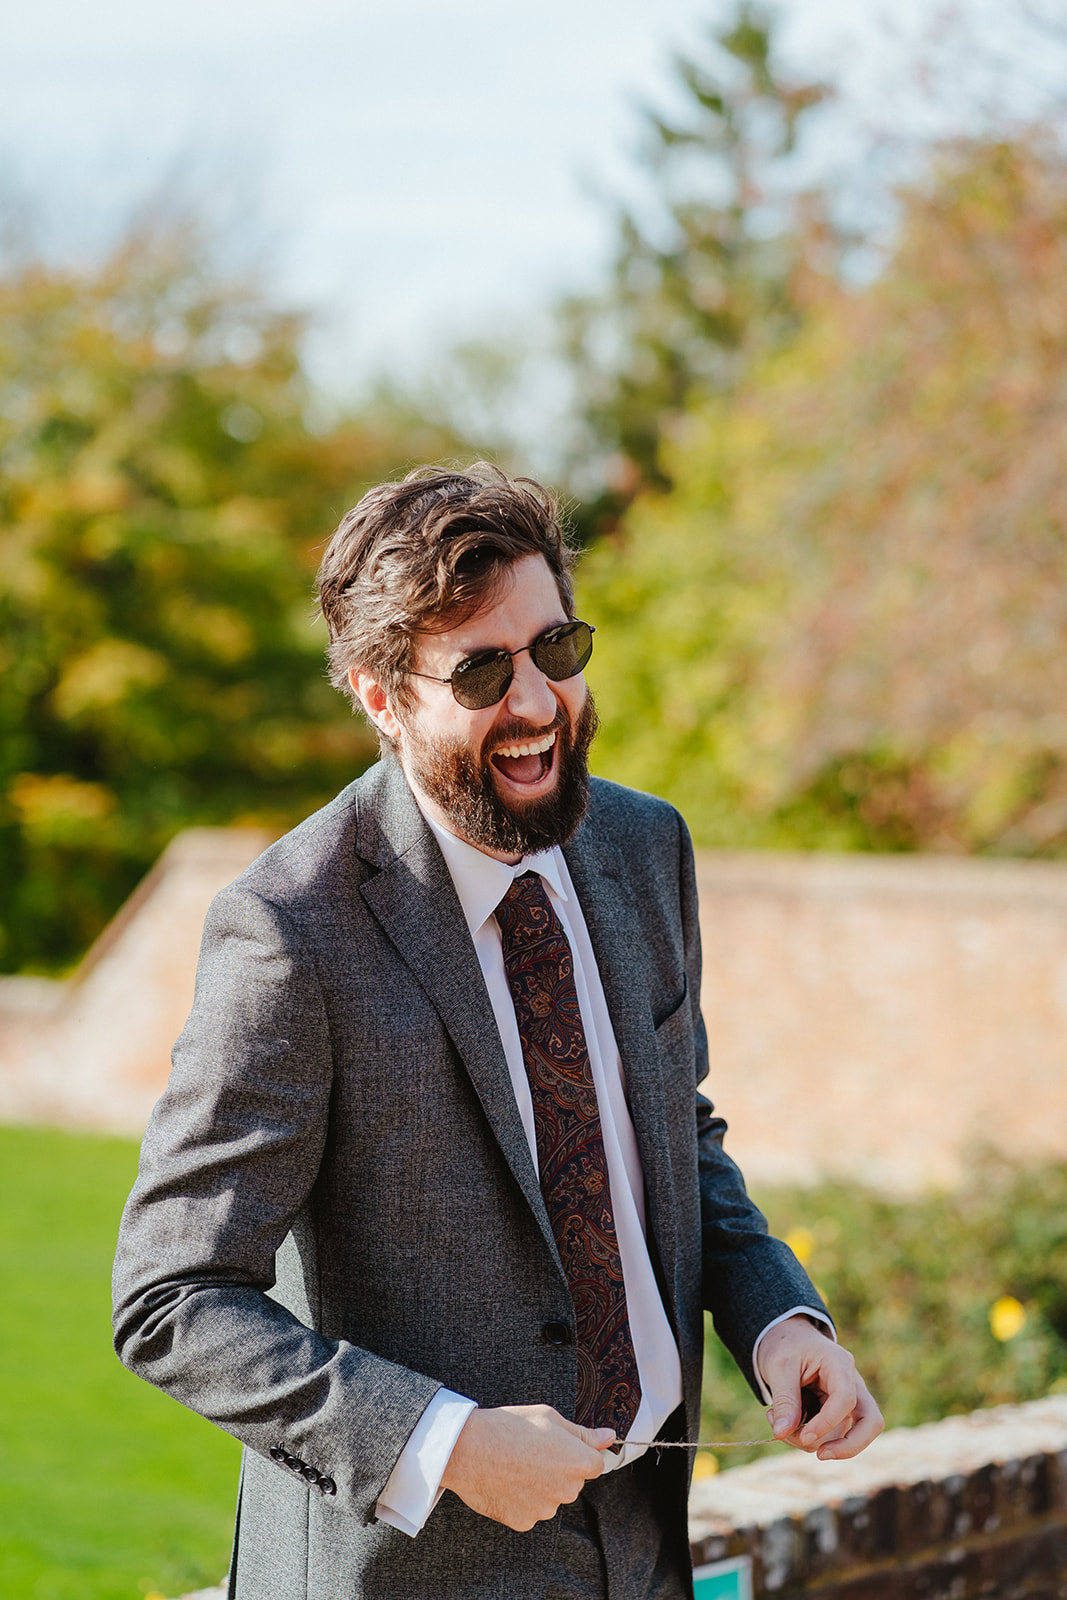 Guest laughing with Sunglasses on Ufton Court